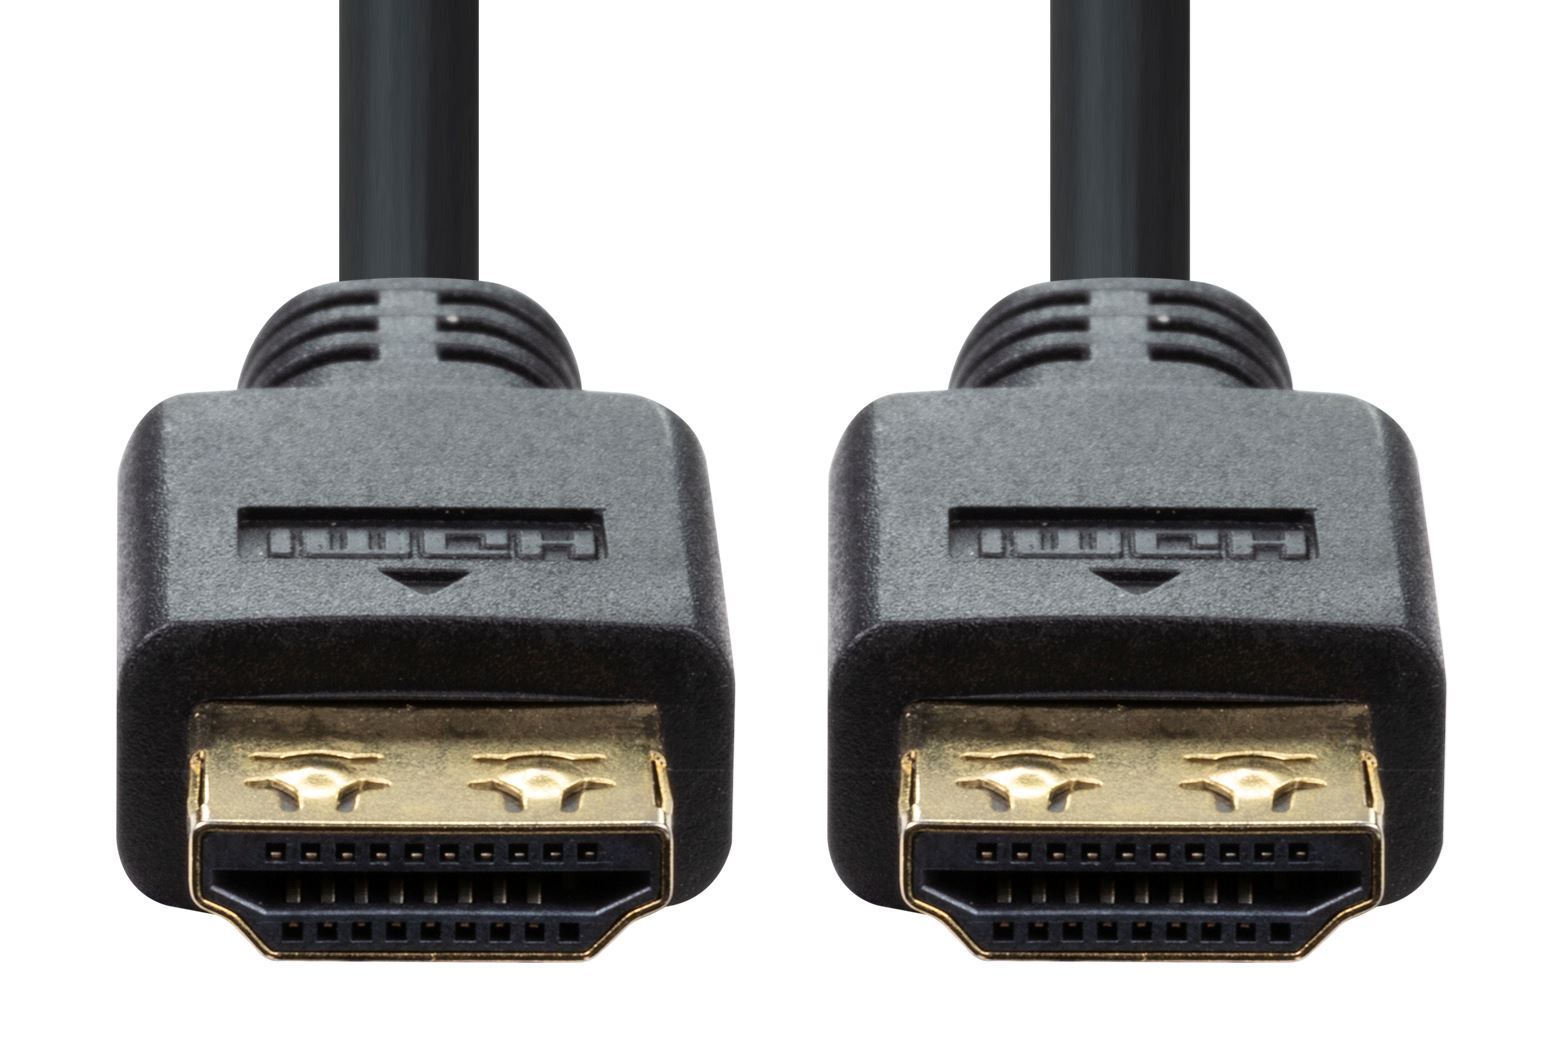 DYNAMIX_5m_HDMI_High_Speed_18Gbps_Flexi_Lock_Cable_with_Ethernet._Max_Res:_4K2K@30/60Hz._32_Audio_channels._10/12bit_colour_depth._Supports_CEC_2.0,_3D,_ARC,_Ethernet_2x_simultaneous_video_streams. 744